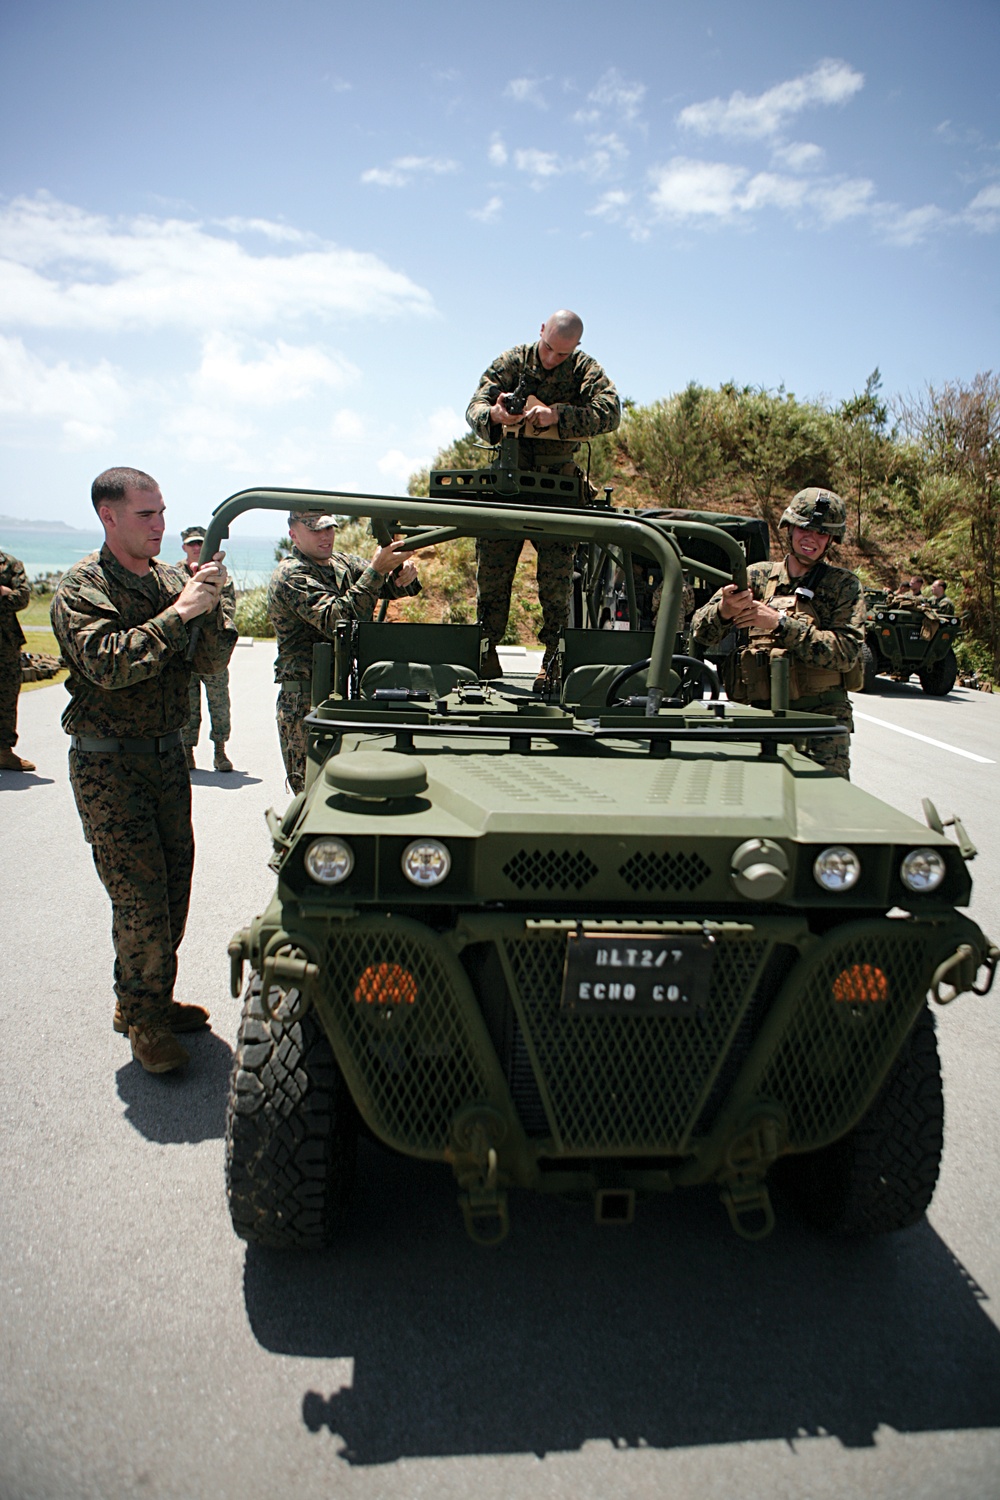 Technical, tactical training keeps 31st MEU ready for expeditionary operations